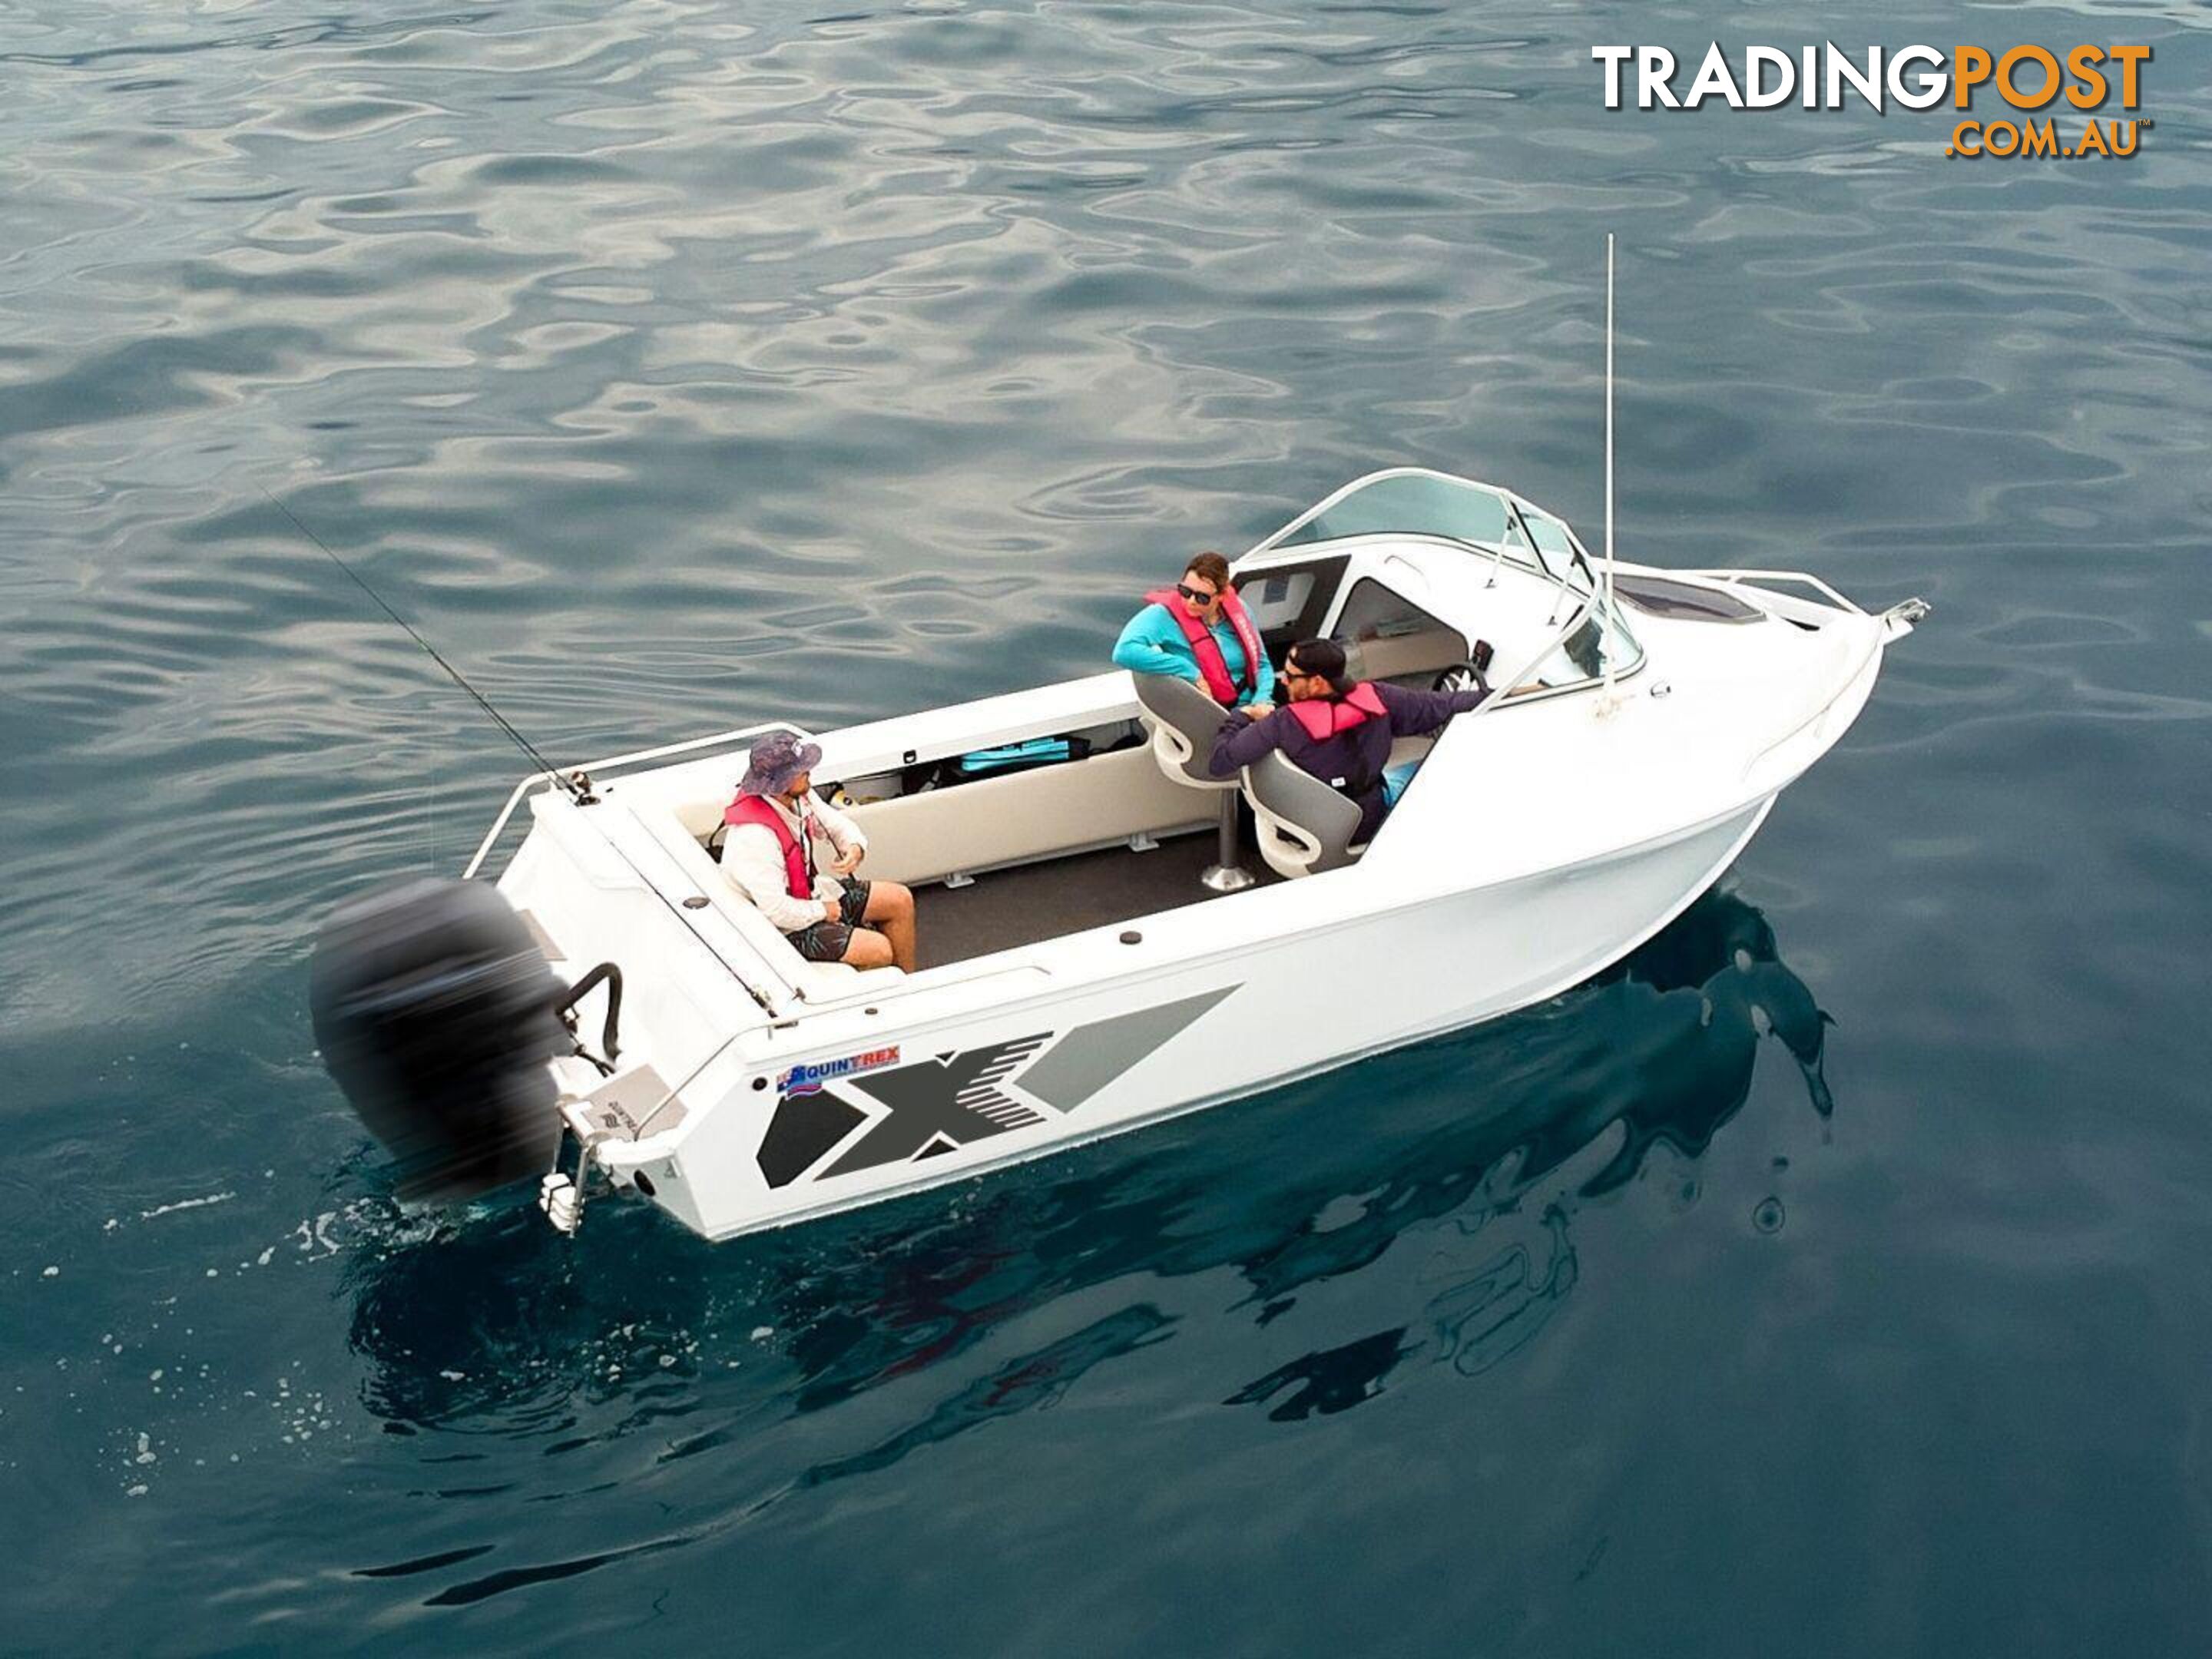 Quintrex 590 Ocean Spirit + Yamaha F150hp 4-Stroke - Pack 3 for sale online prices